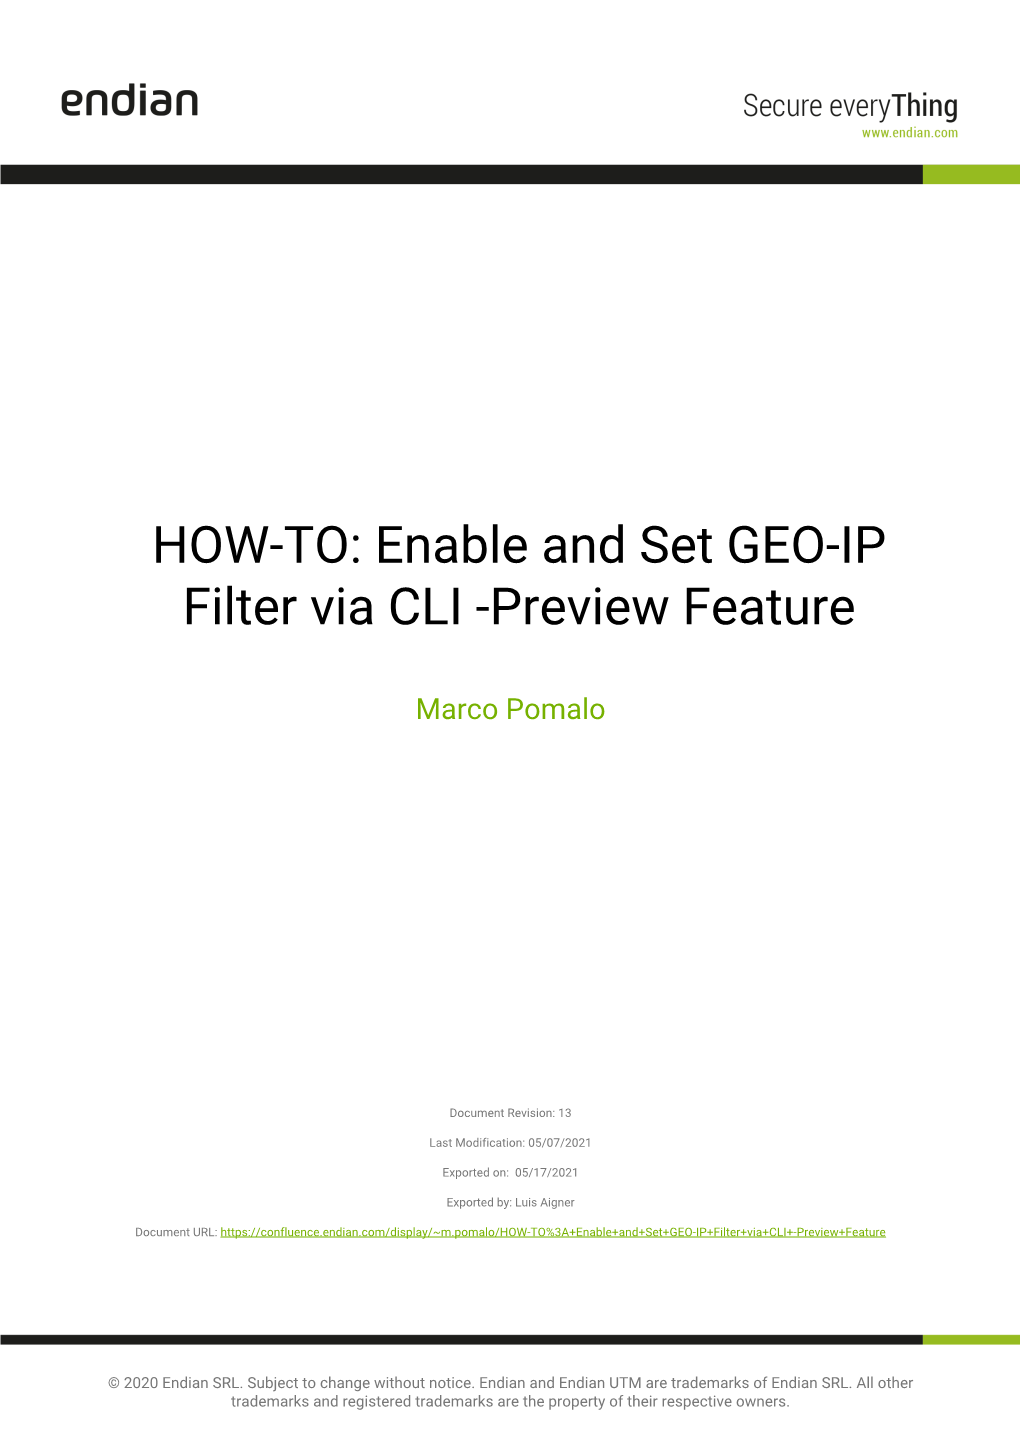 HOW-TO: Enable and Set GEO-IP Filter Via CLI -Preview Feature